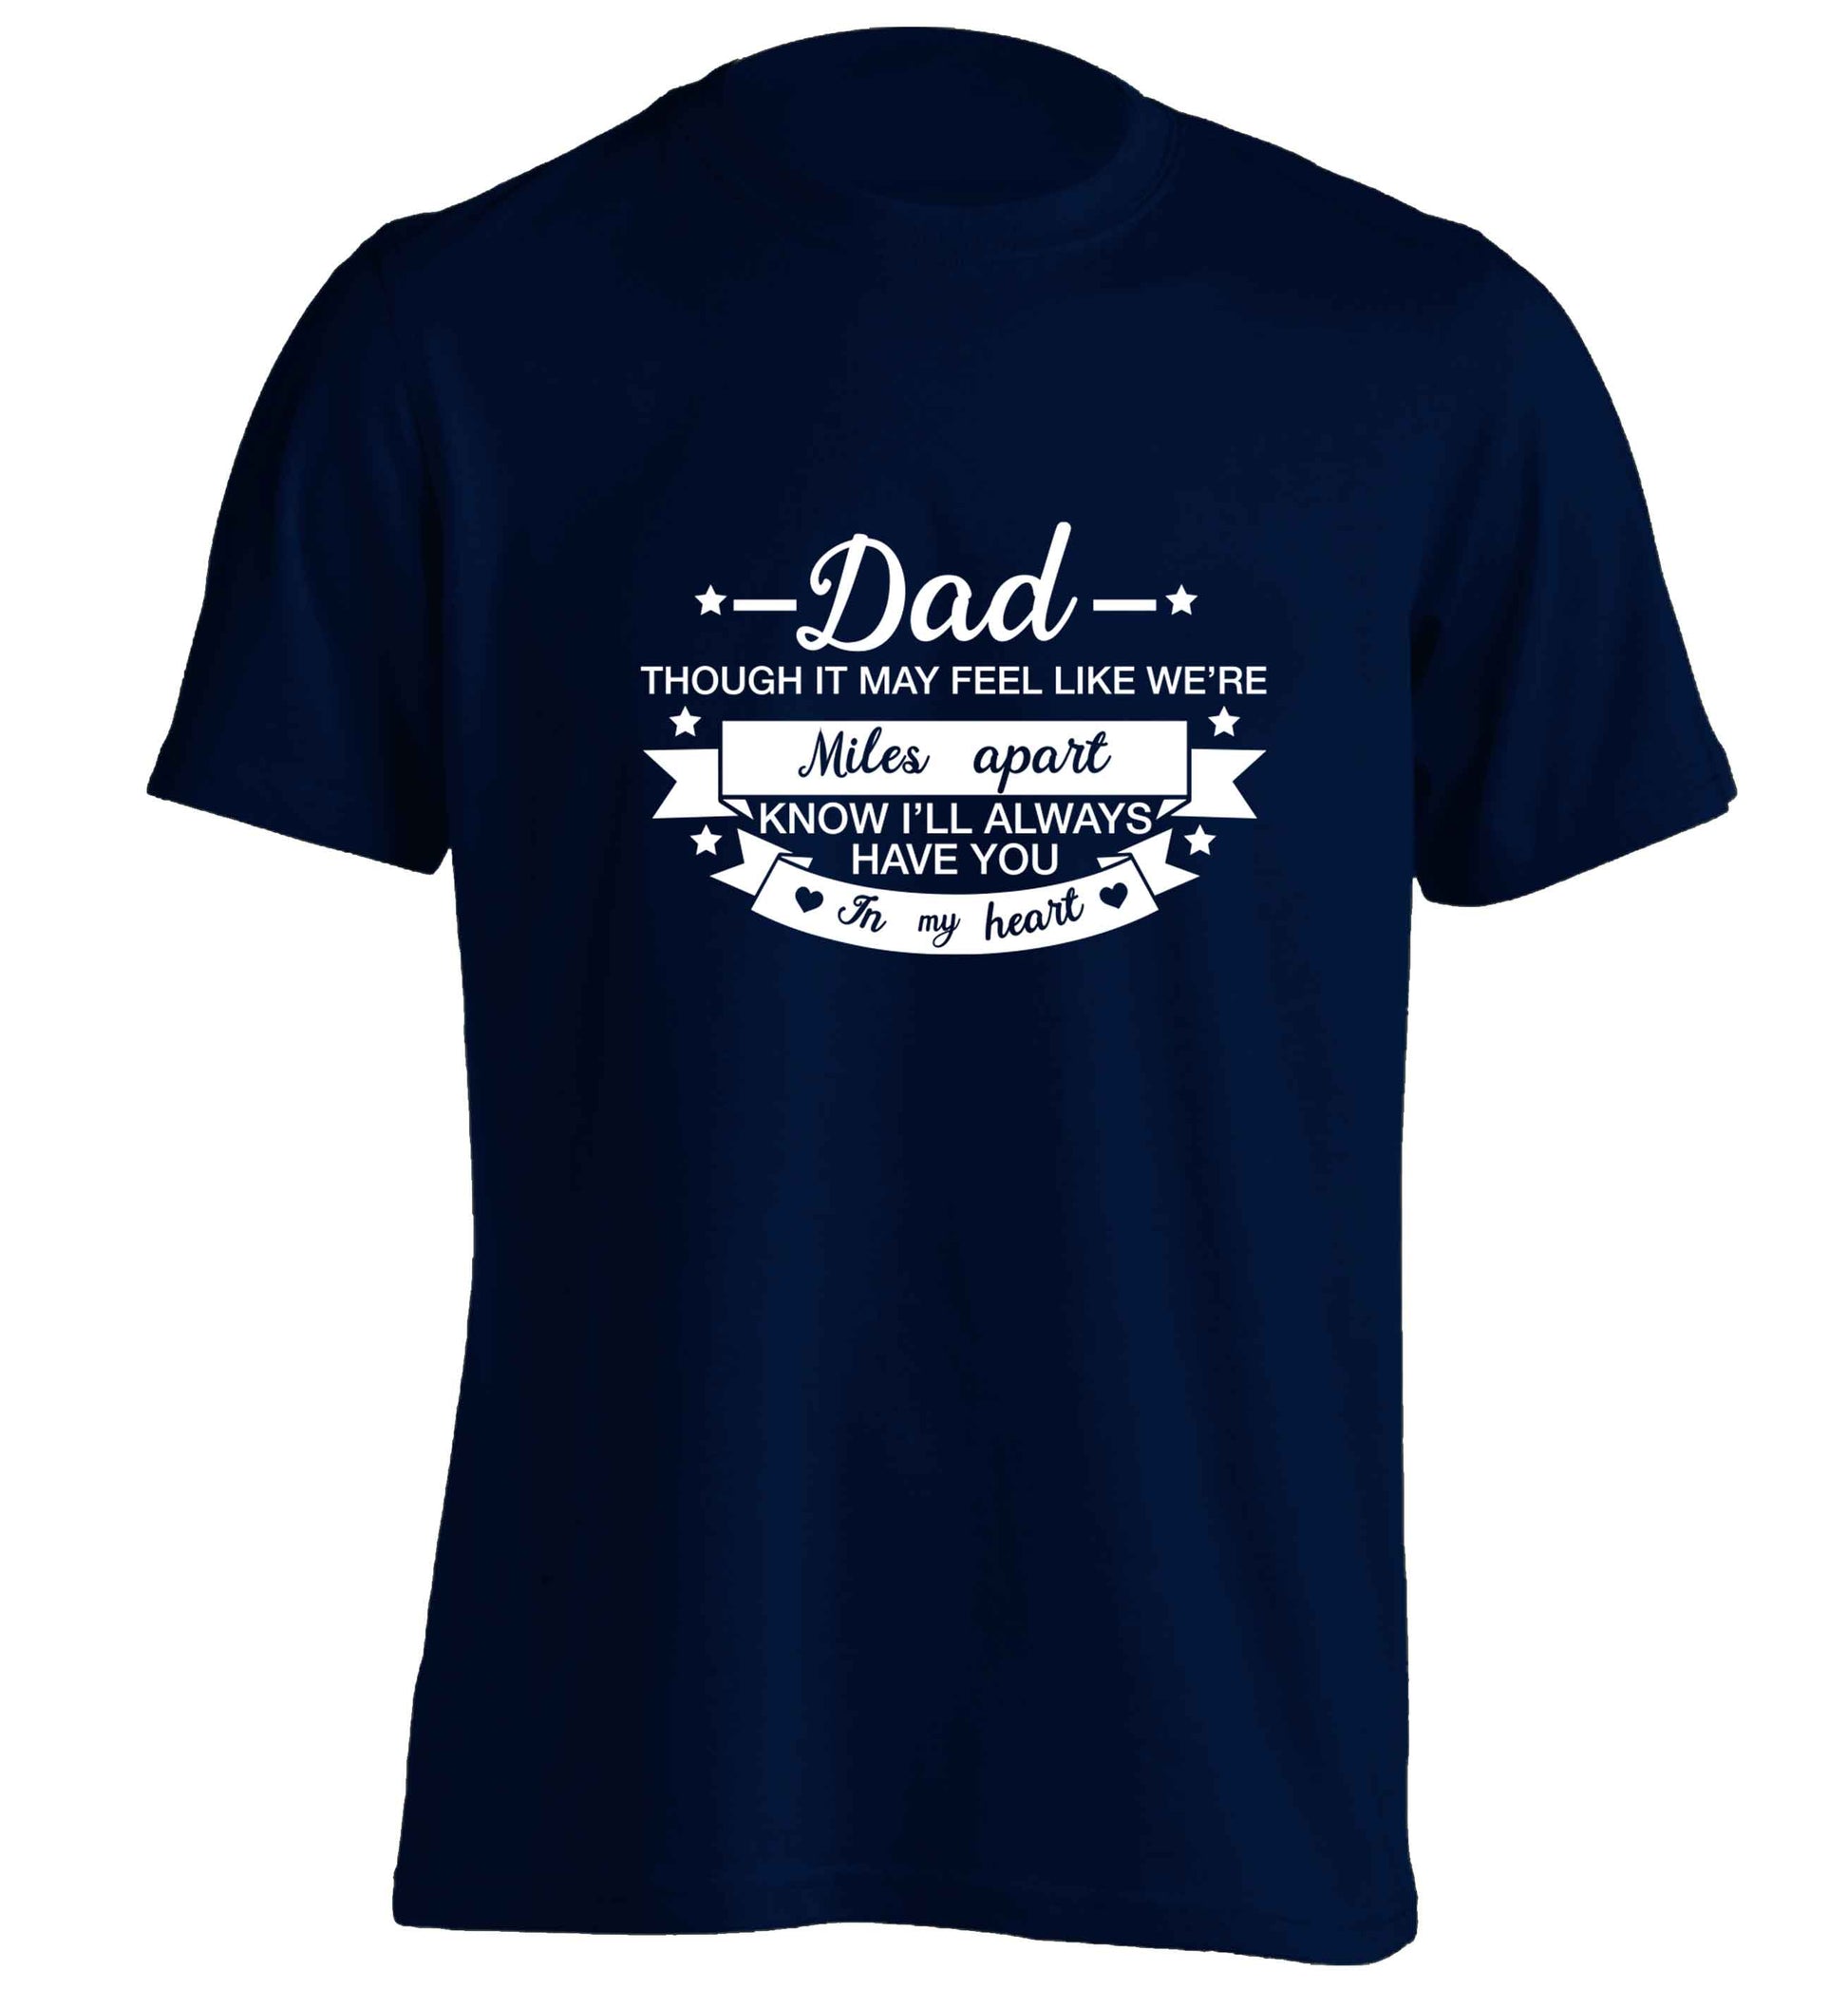 Dad though it may feel like we're miles apart know I'll always have you in my heart adults unisex navy Tshirt 2XL